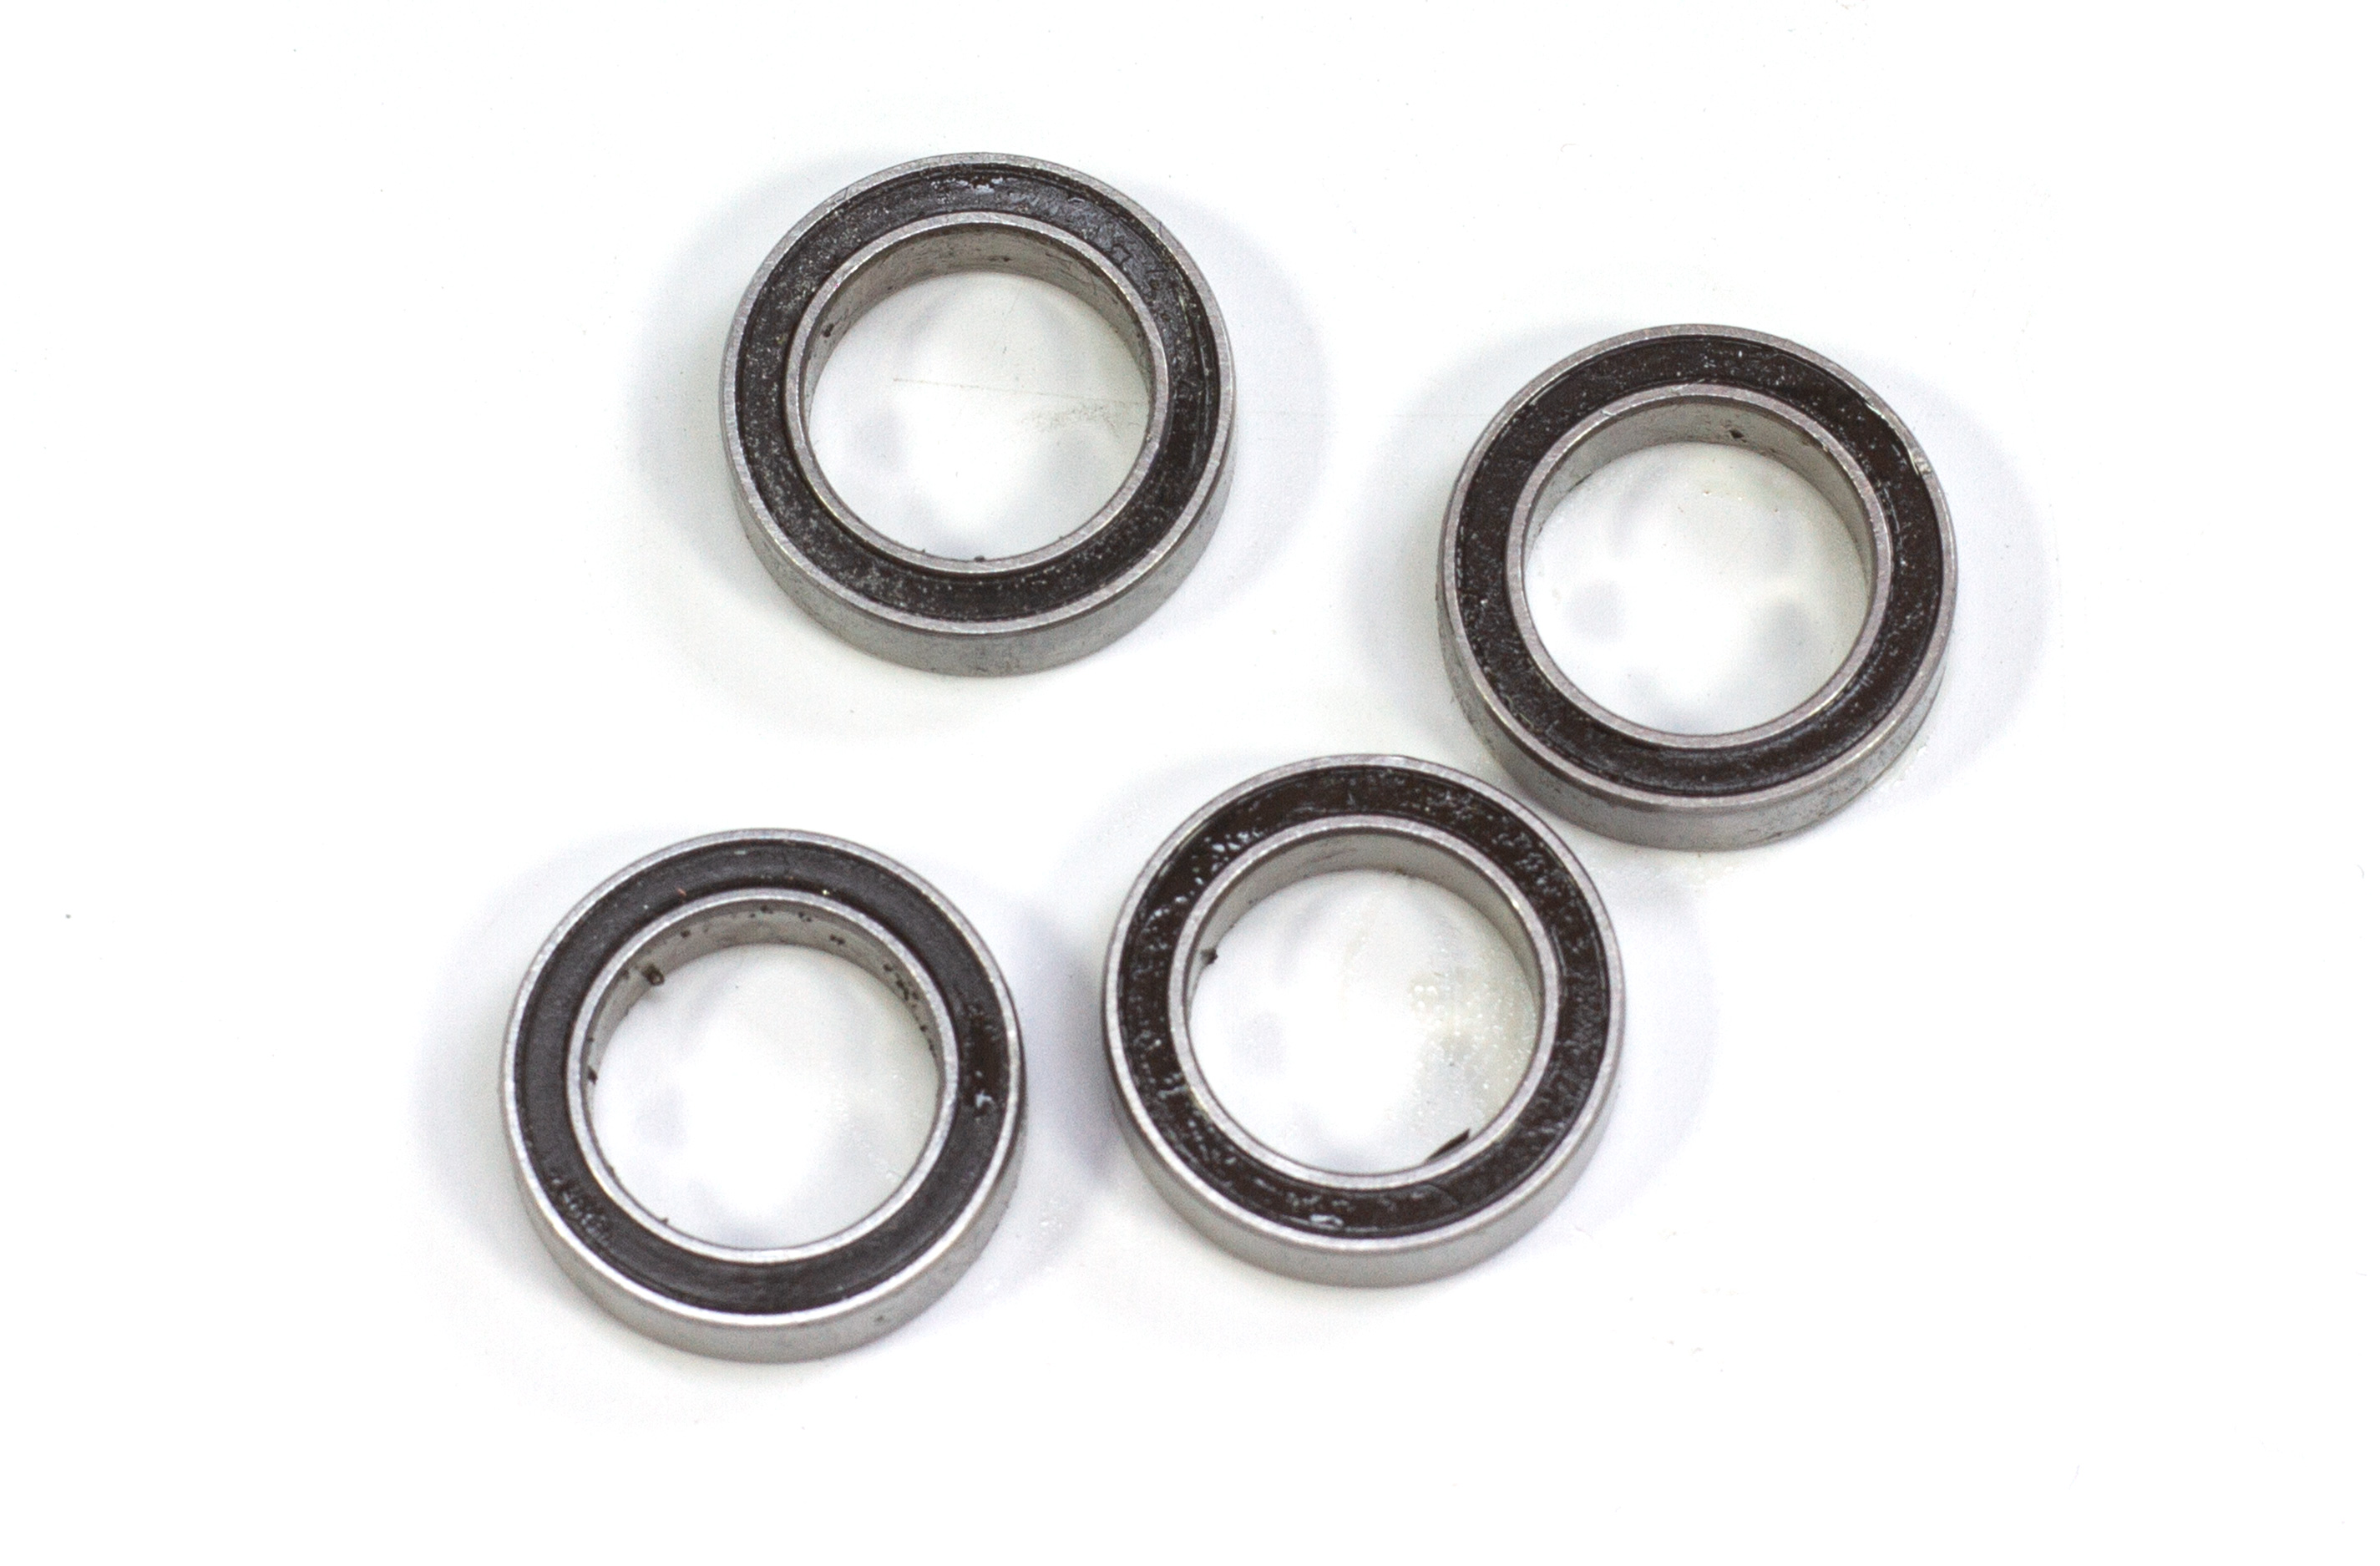 D08 Carson Ball bearing 10x15x4 mm for Wild GP Attack